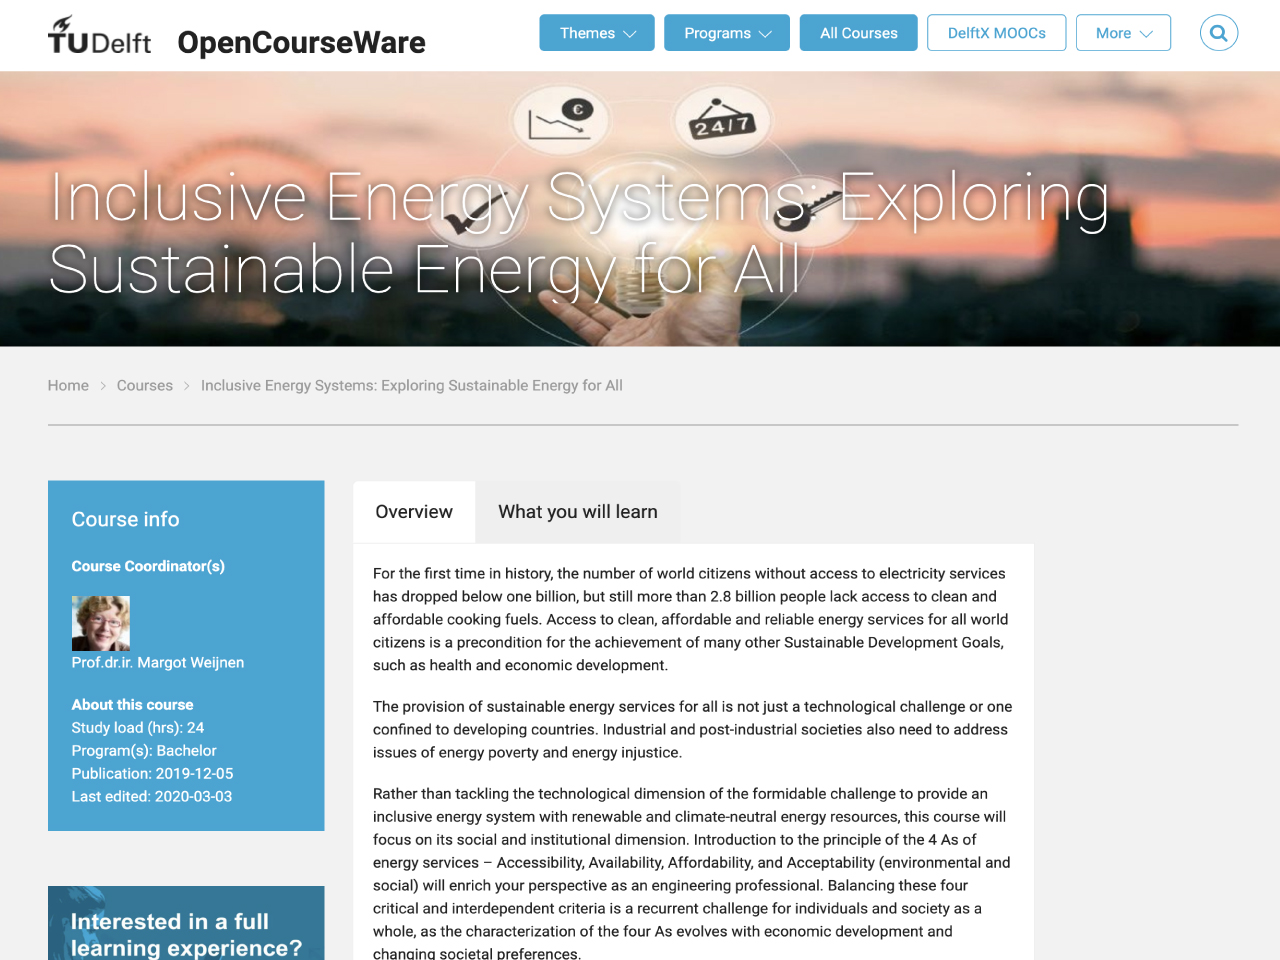 Inclusive Energy Systems: Exploring Sustainable Energy for All